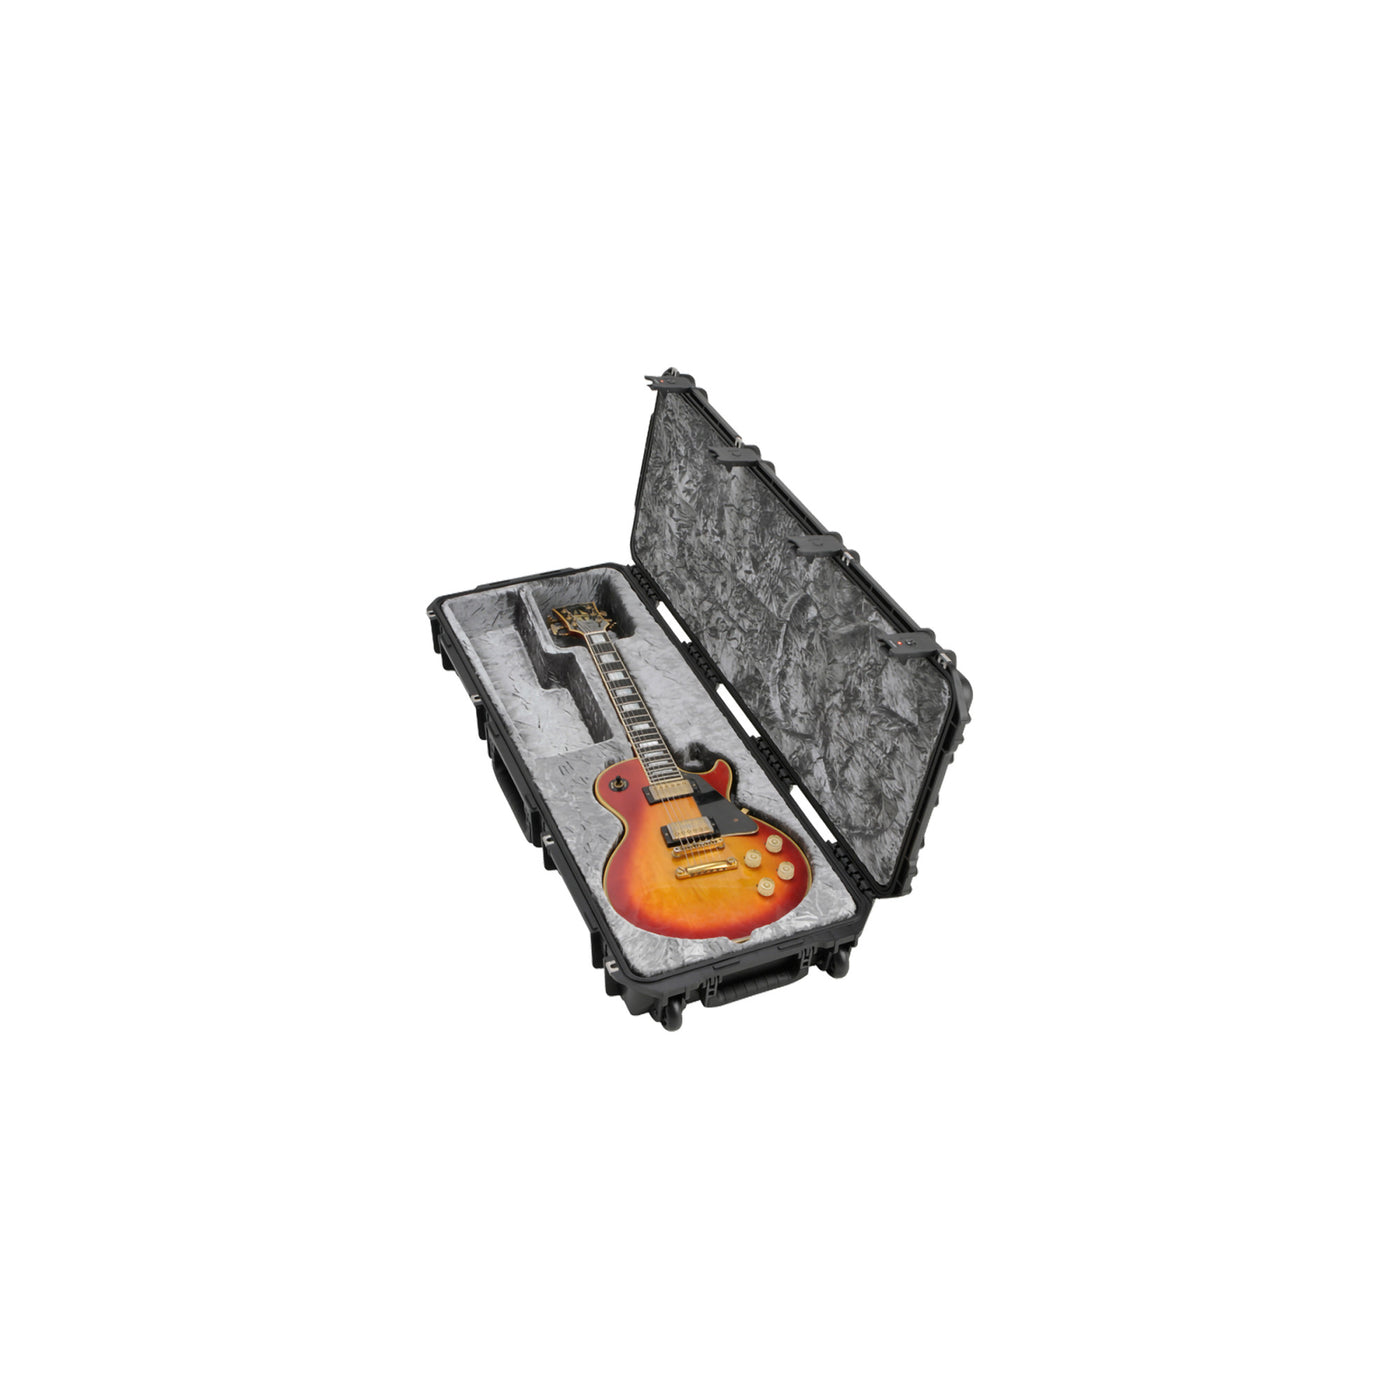 SKB Cases 3i-4214-56 iSeries Waterproof Hardshell Les Paul Guitar Case with Pressure Equalization, Wheels, and TSA Locking Latch System